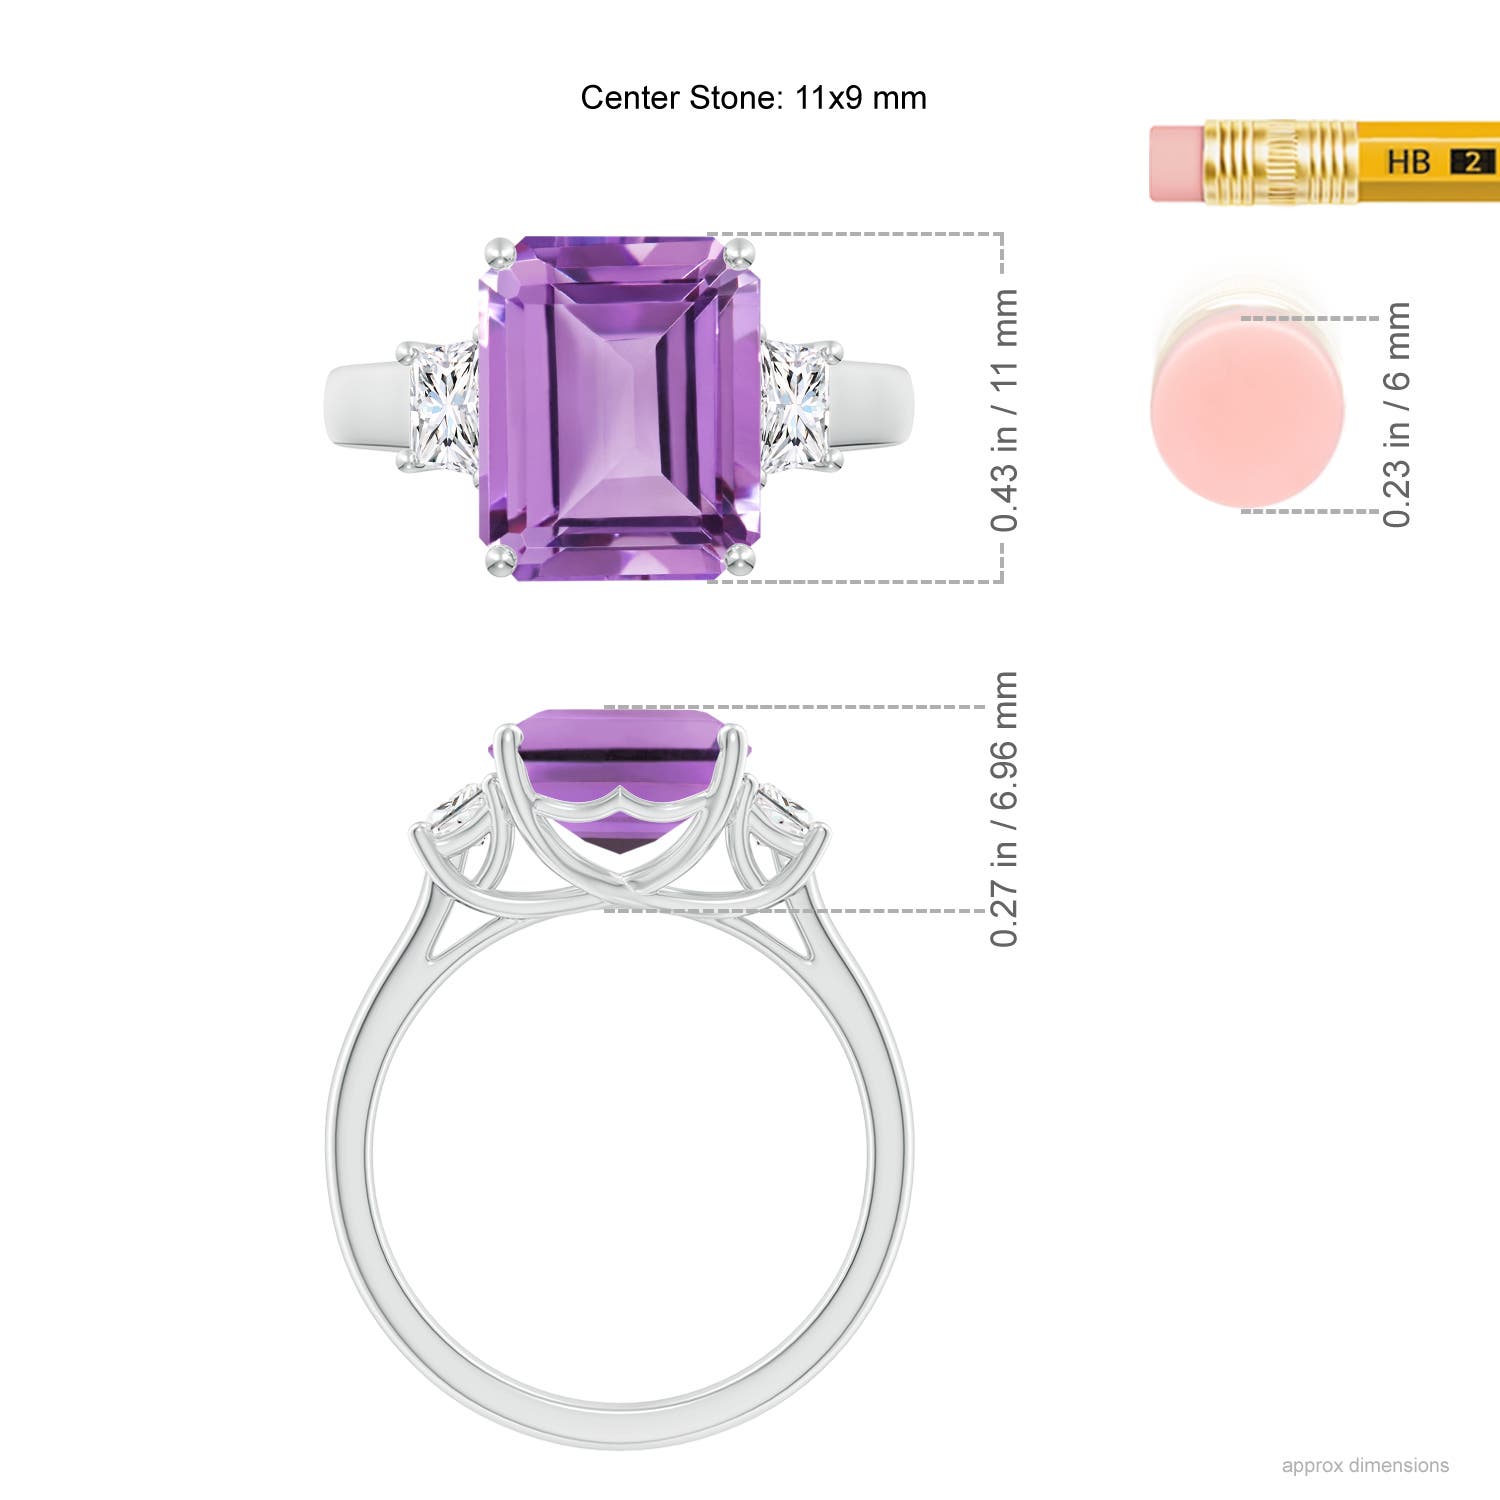 A- Amethyst / 4.32 CT / 14 KT White Gold